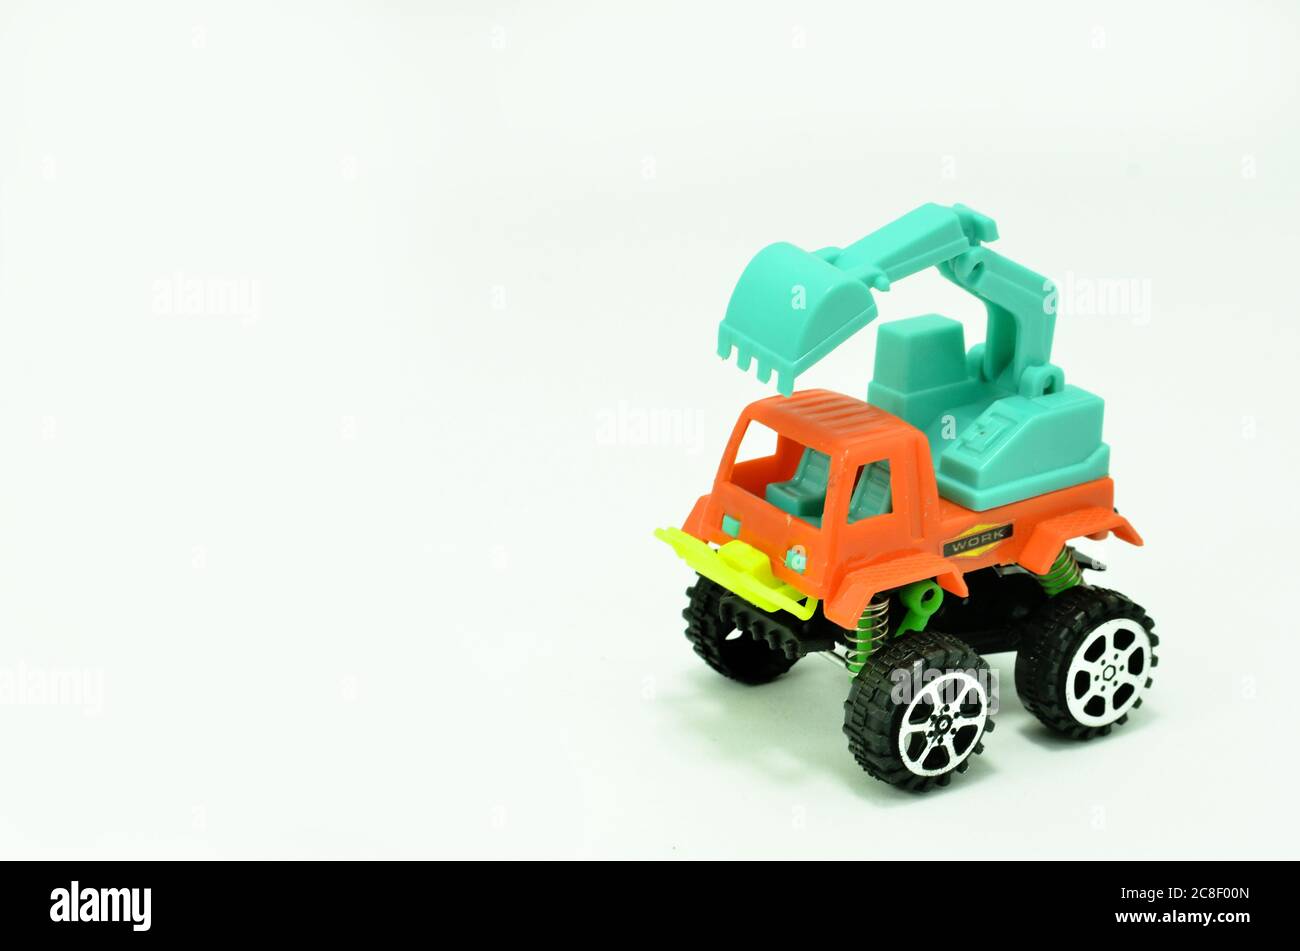 Car plastic truck and excavator toy for kids to have fun with there learning Stock Photo